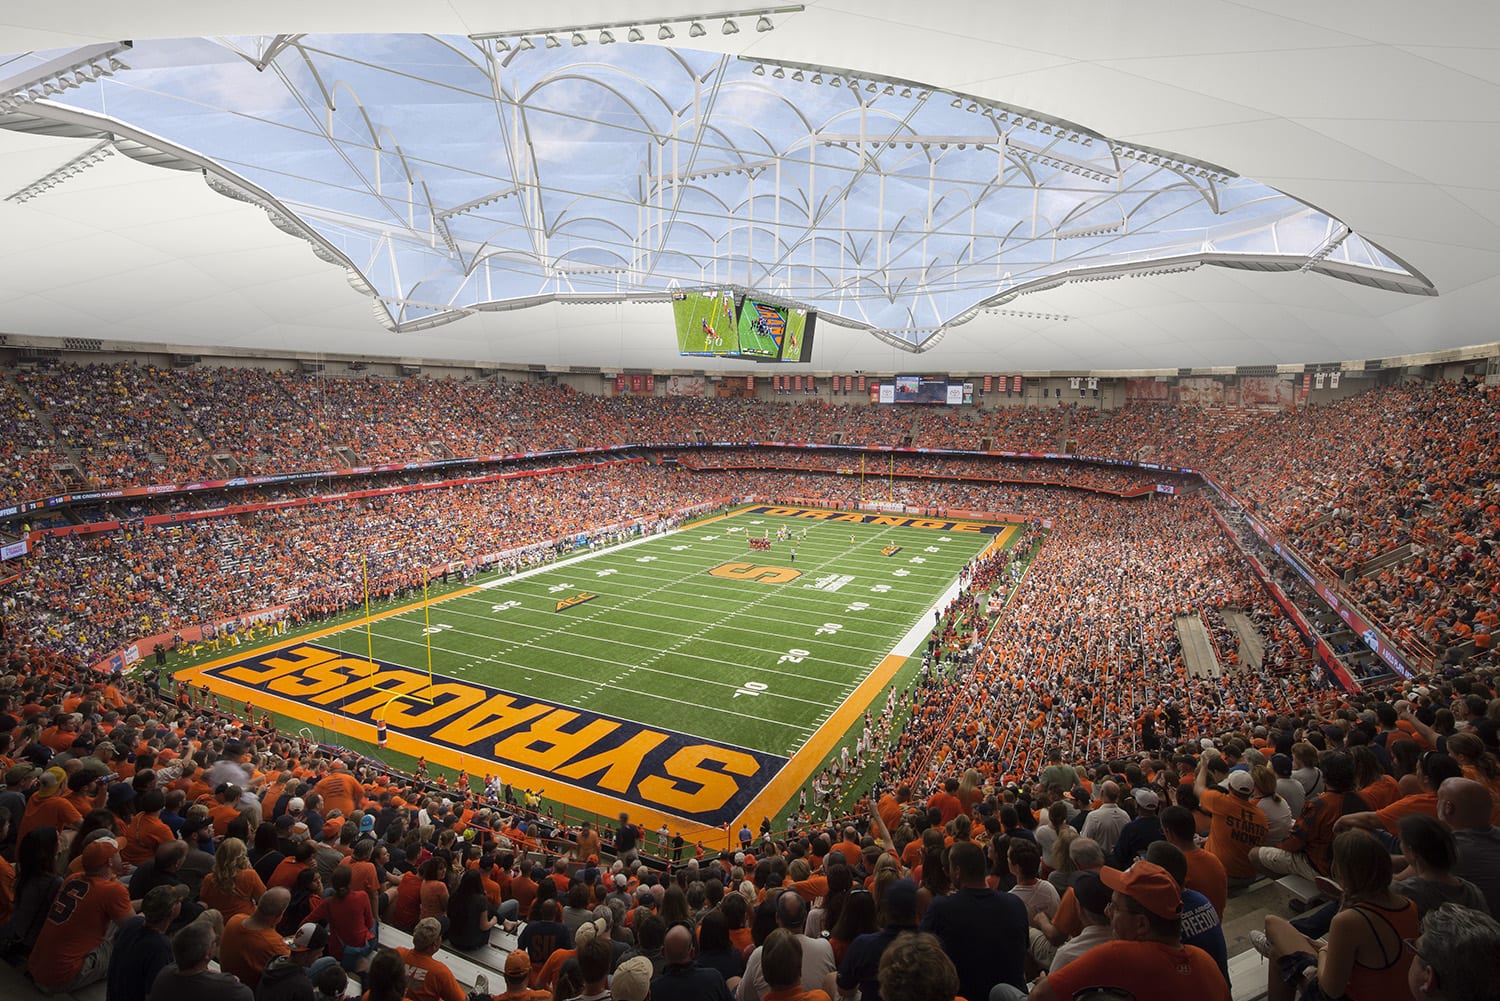 Illustration of interior Carrier Dome Renovations